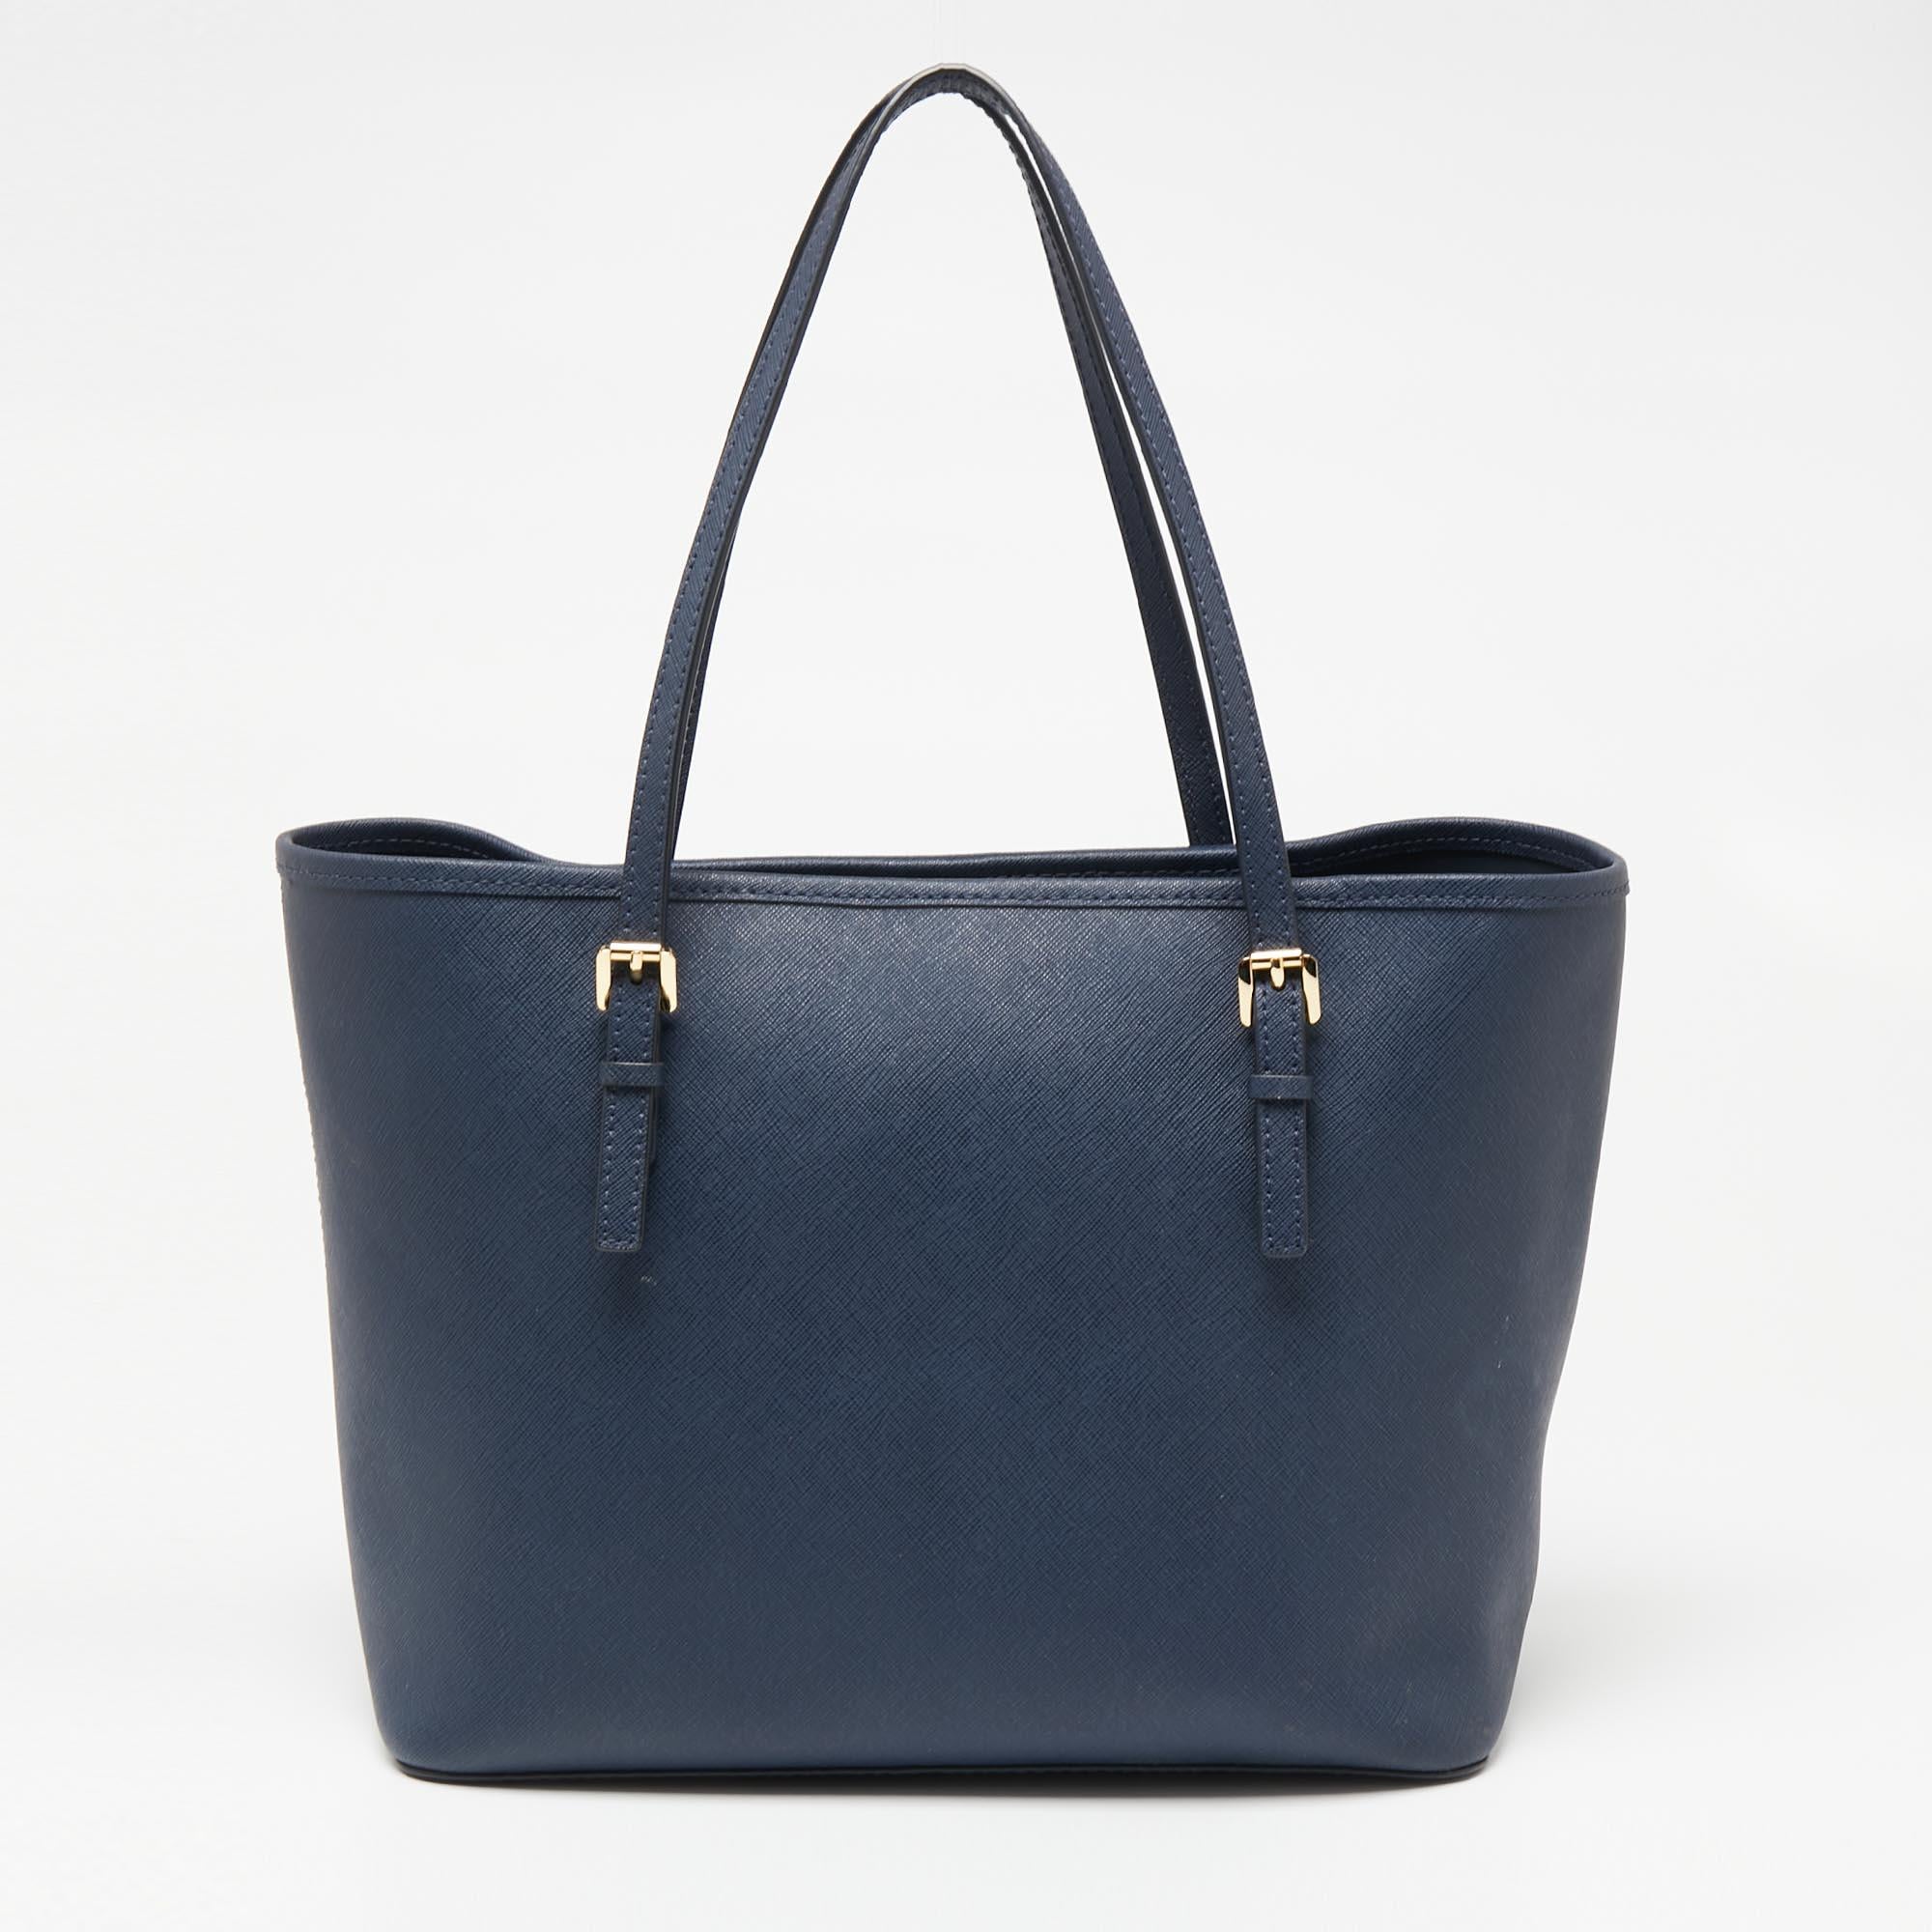 This Michael Kors tote promises to take you through the day with ease, whether you're at work or out and about in the city. From its design to its structure, the leather bag promises charm and durability. It has shoulder handles and a spacious